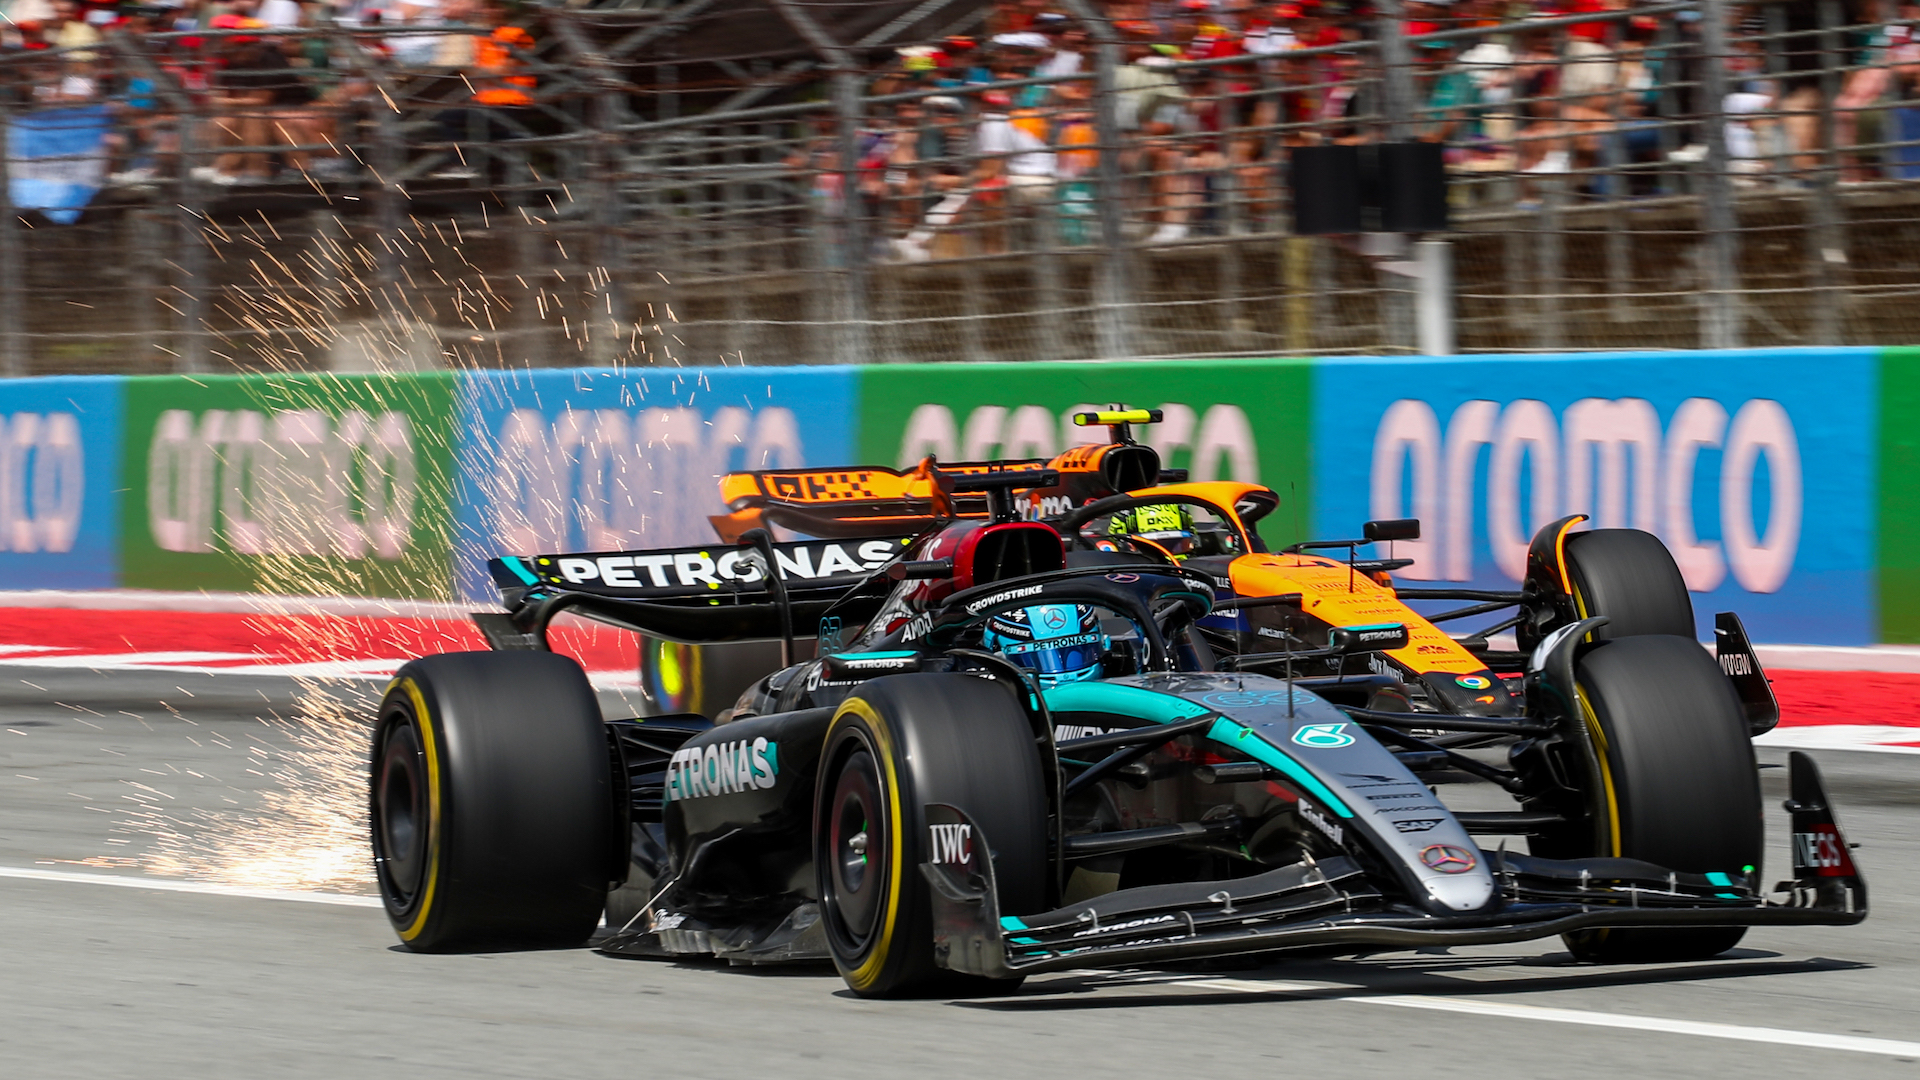 George Russell of Mercedes defends against Lando Norris of McLaren during the F1 Grand Prix of Spain.